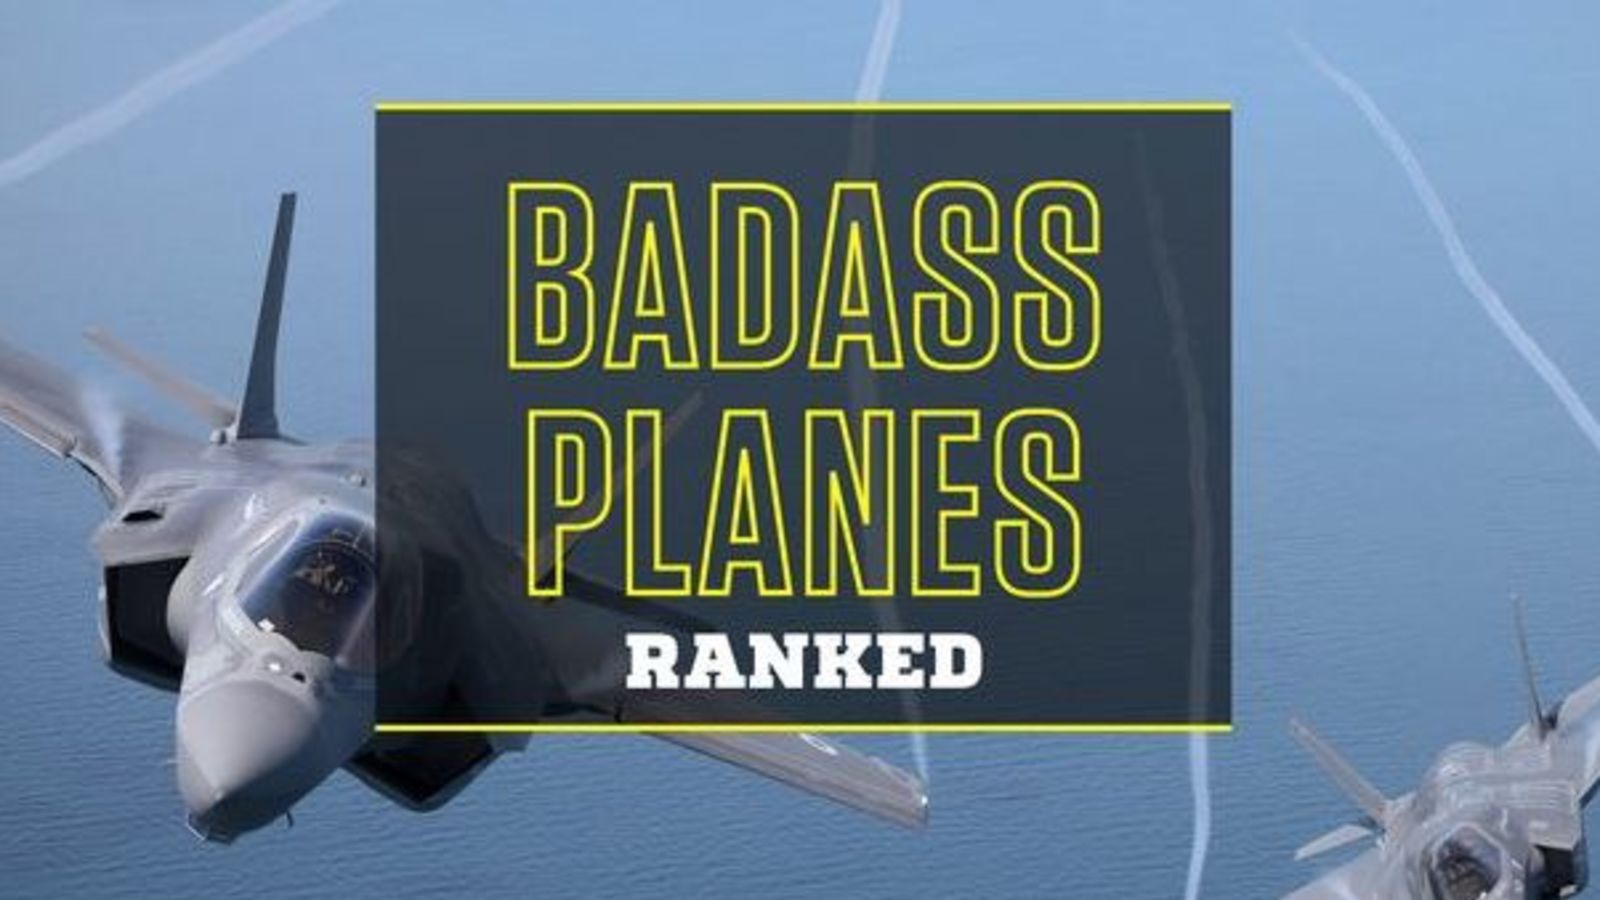 Illustration for article titled Badass planes